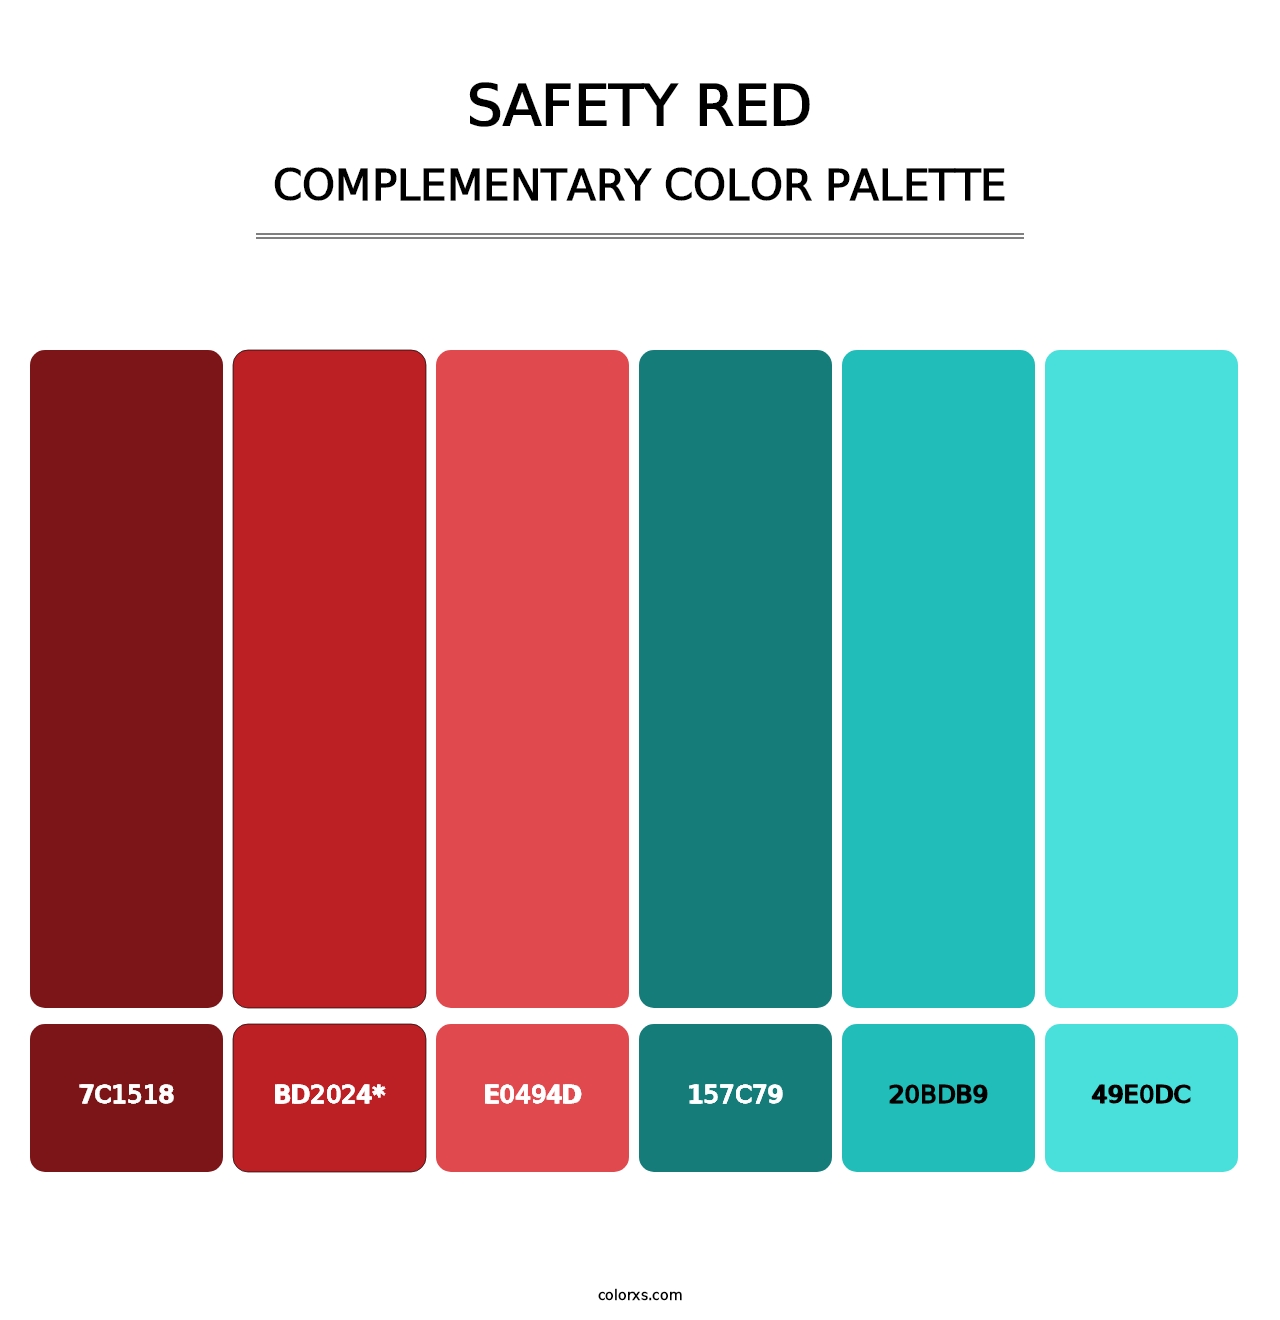 Safety Red - Complementary Color Palette